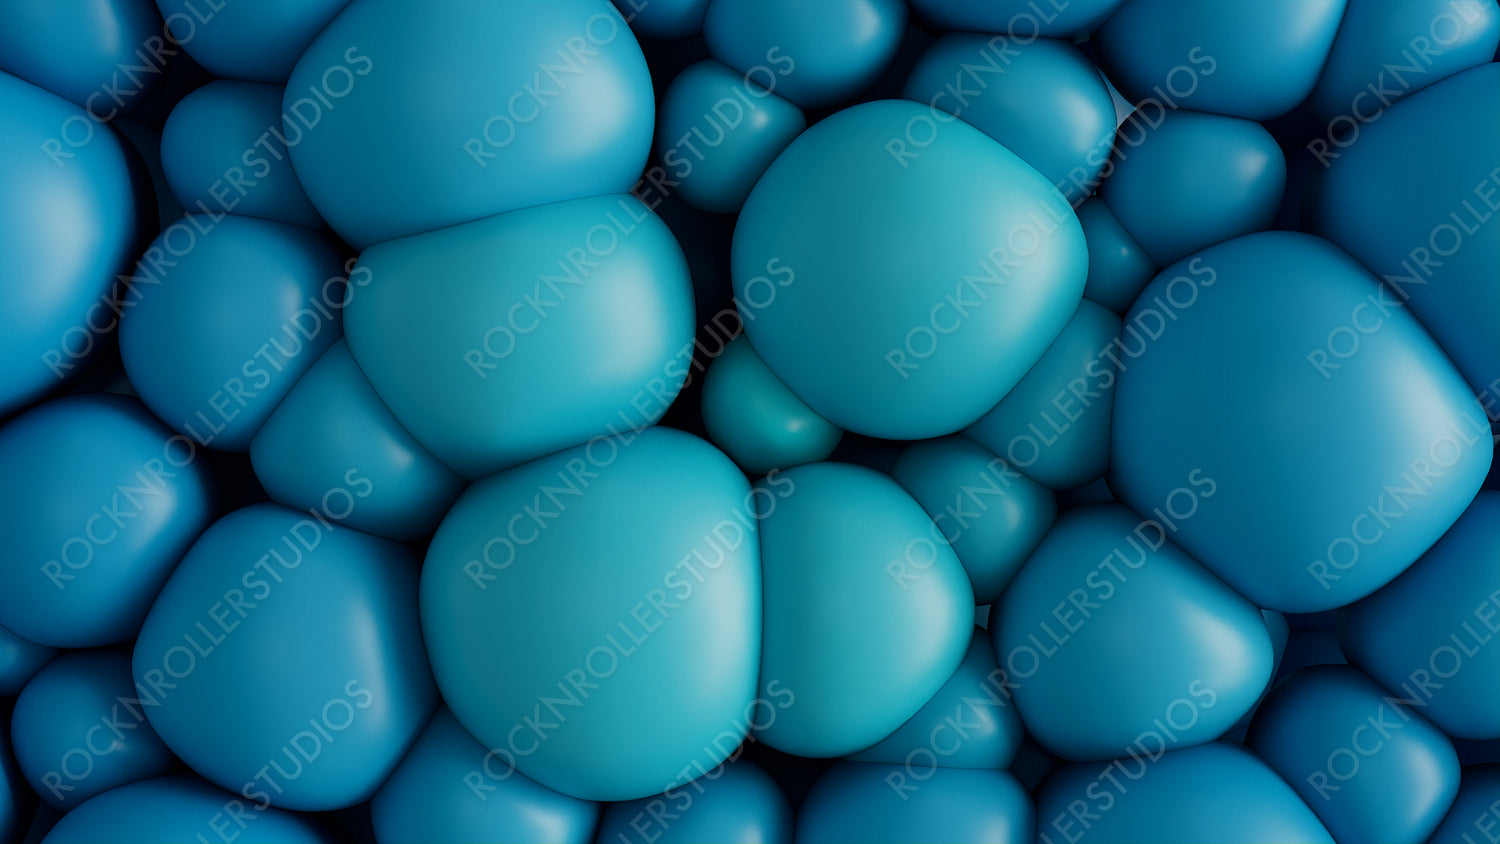 Turquoise and Blue 3D Balloons arranged to create a Multicolored abstract background. 3D Render. 